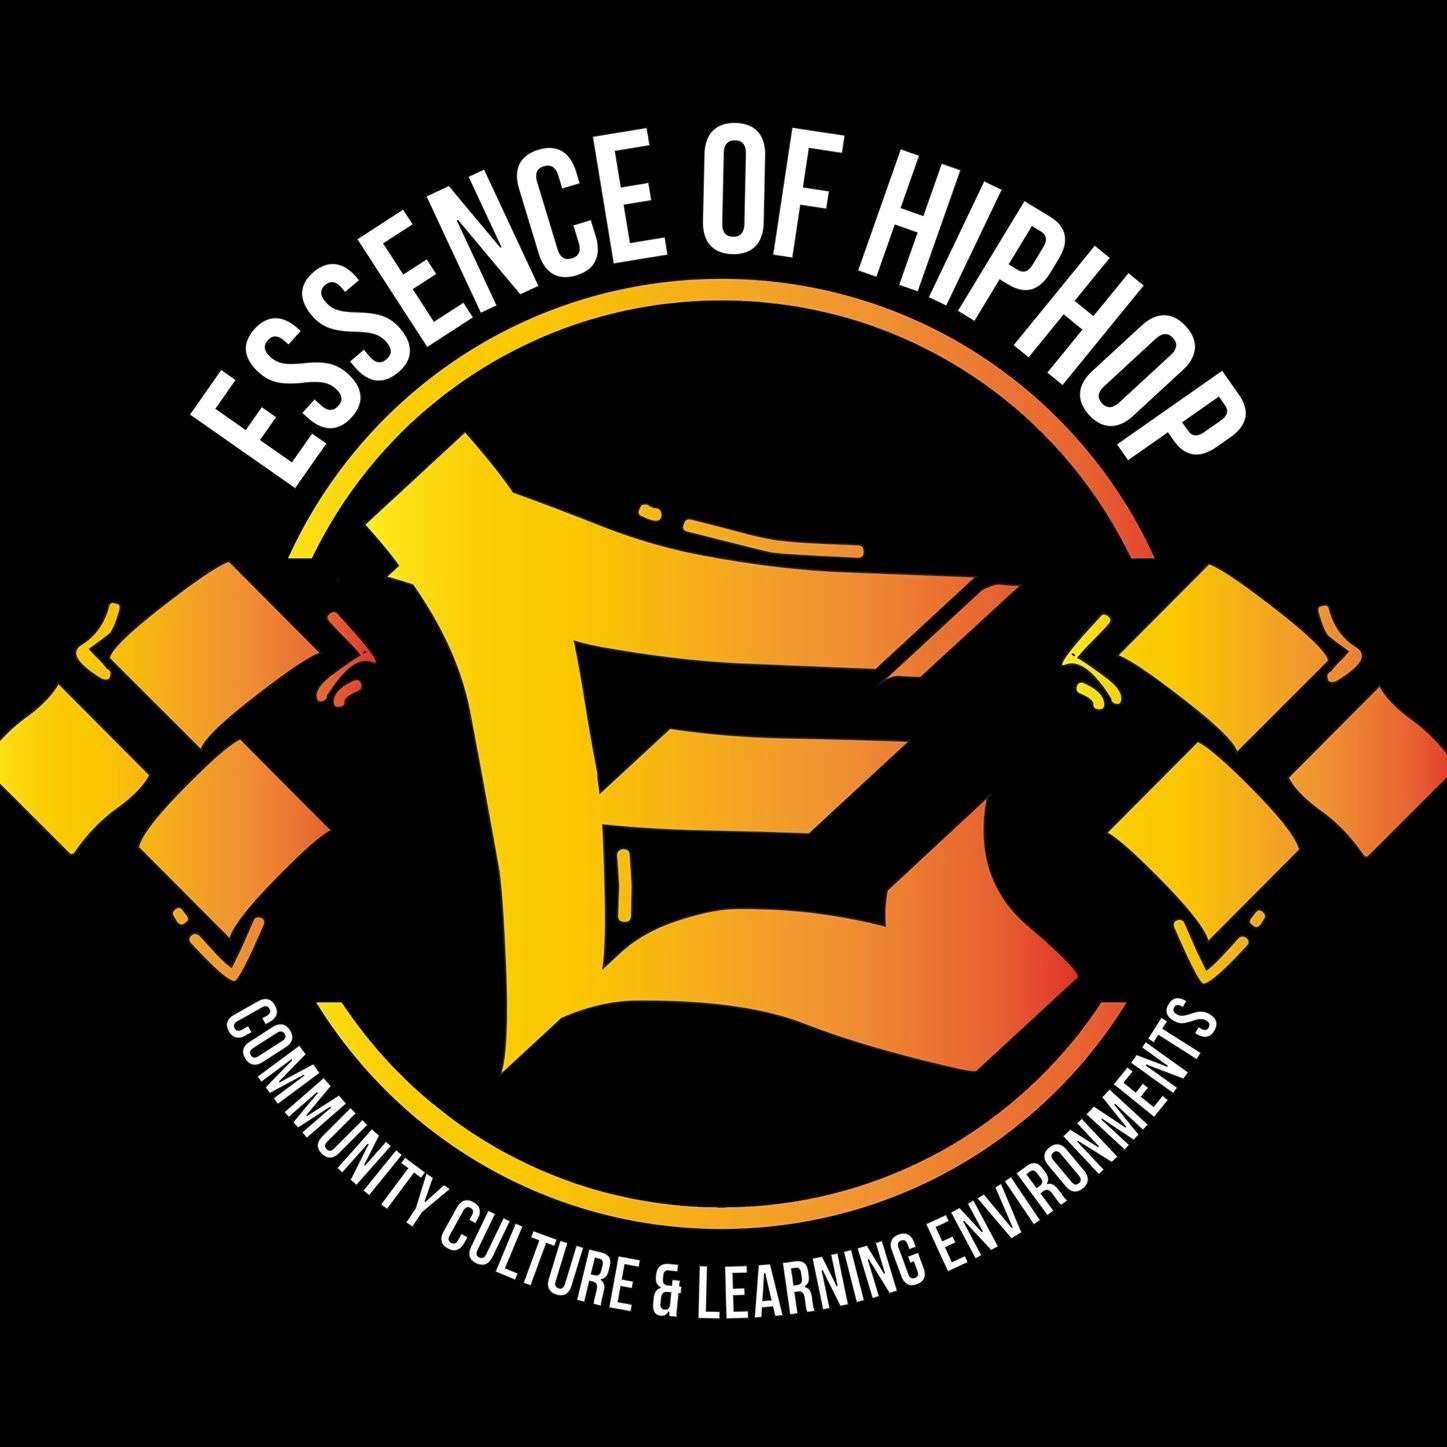 Essence of HipHop-  Community, culture and learning environments